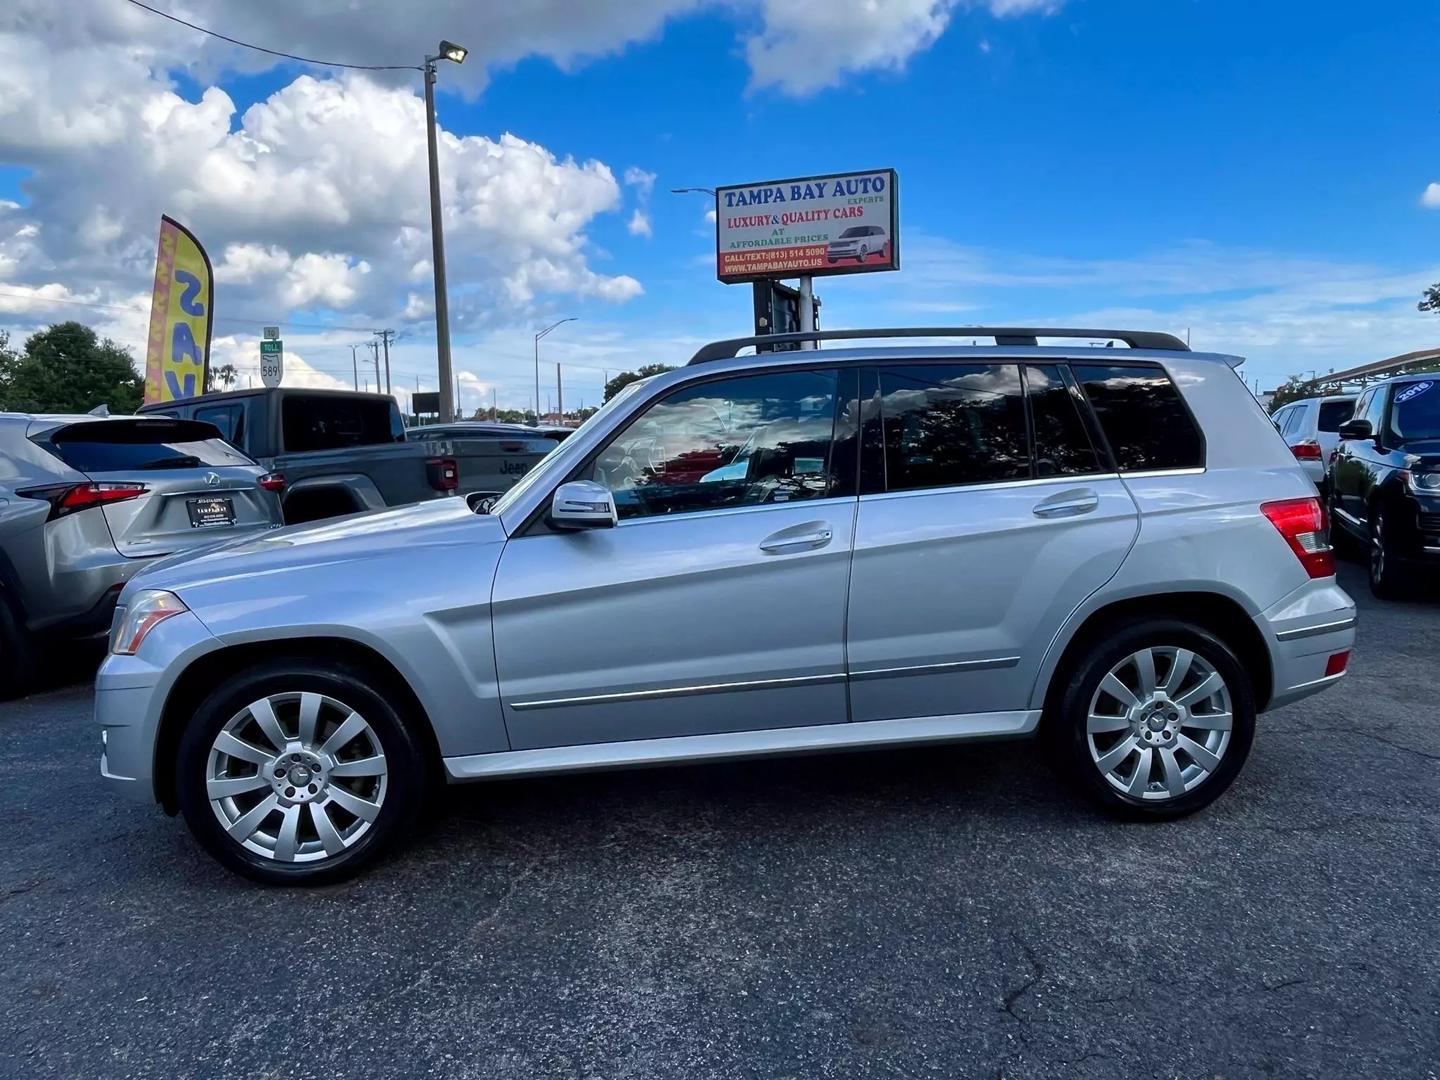 Used 2011 Mercedes-Benz GLK-Class GLK350 with VIN WDCGG5GB3BF583768 for sale in Tampa, FL